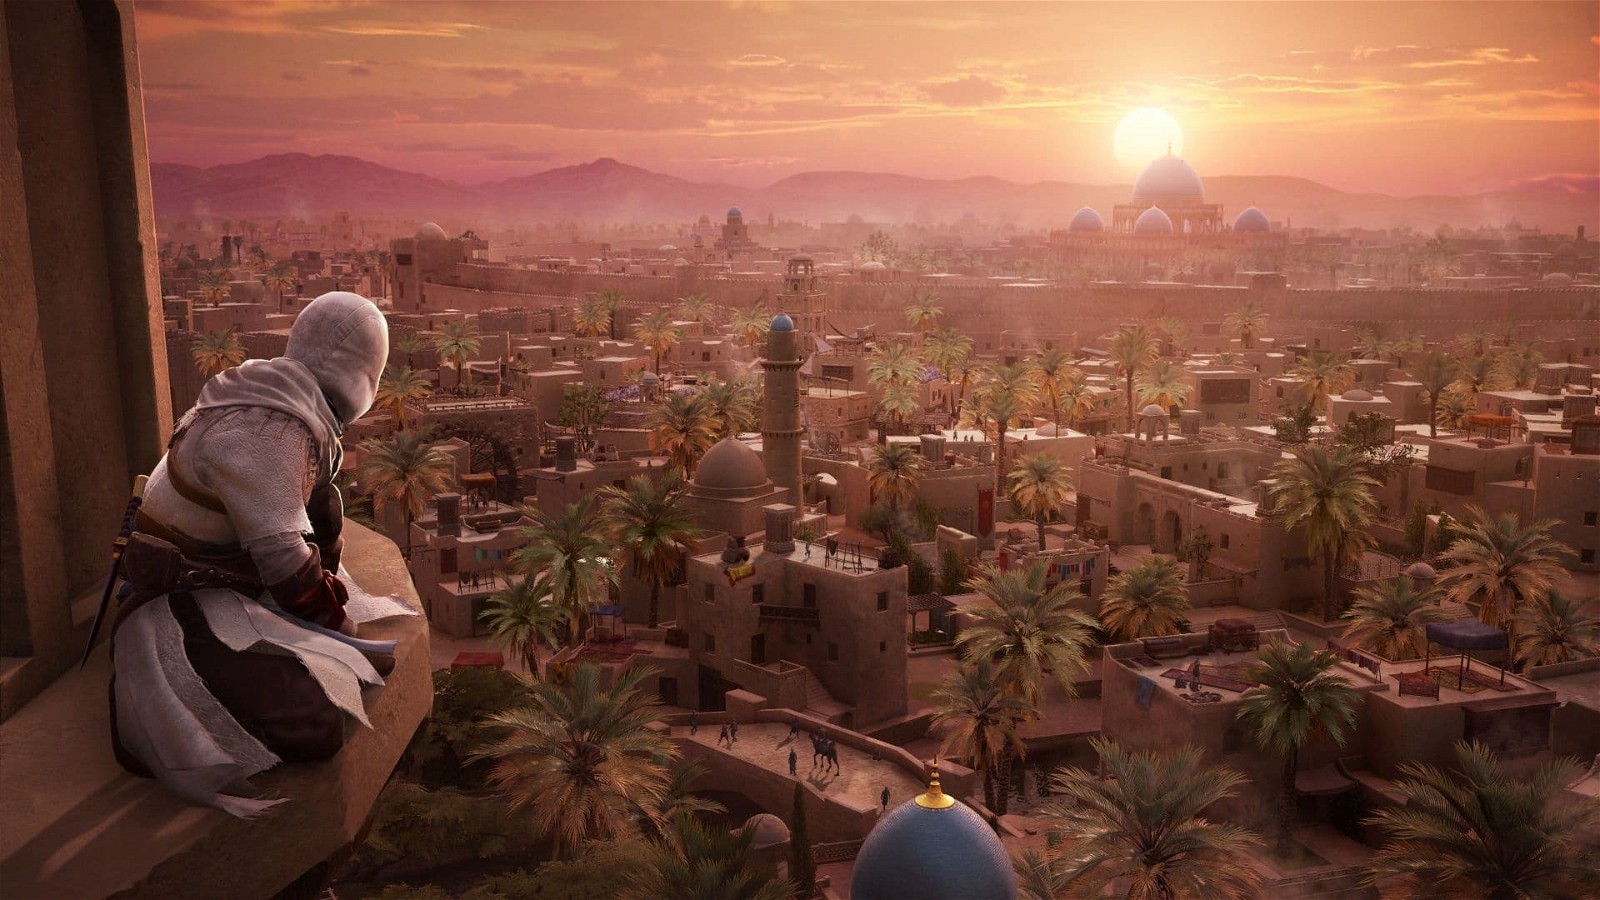 Assassin’s Creed Mirage is set in 9th century Baghdad, one of the most prosperous times for the city